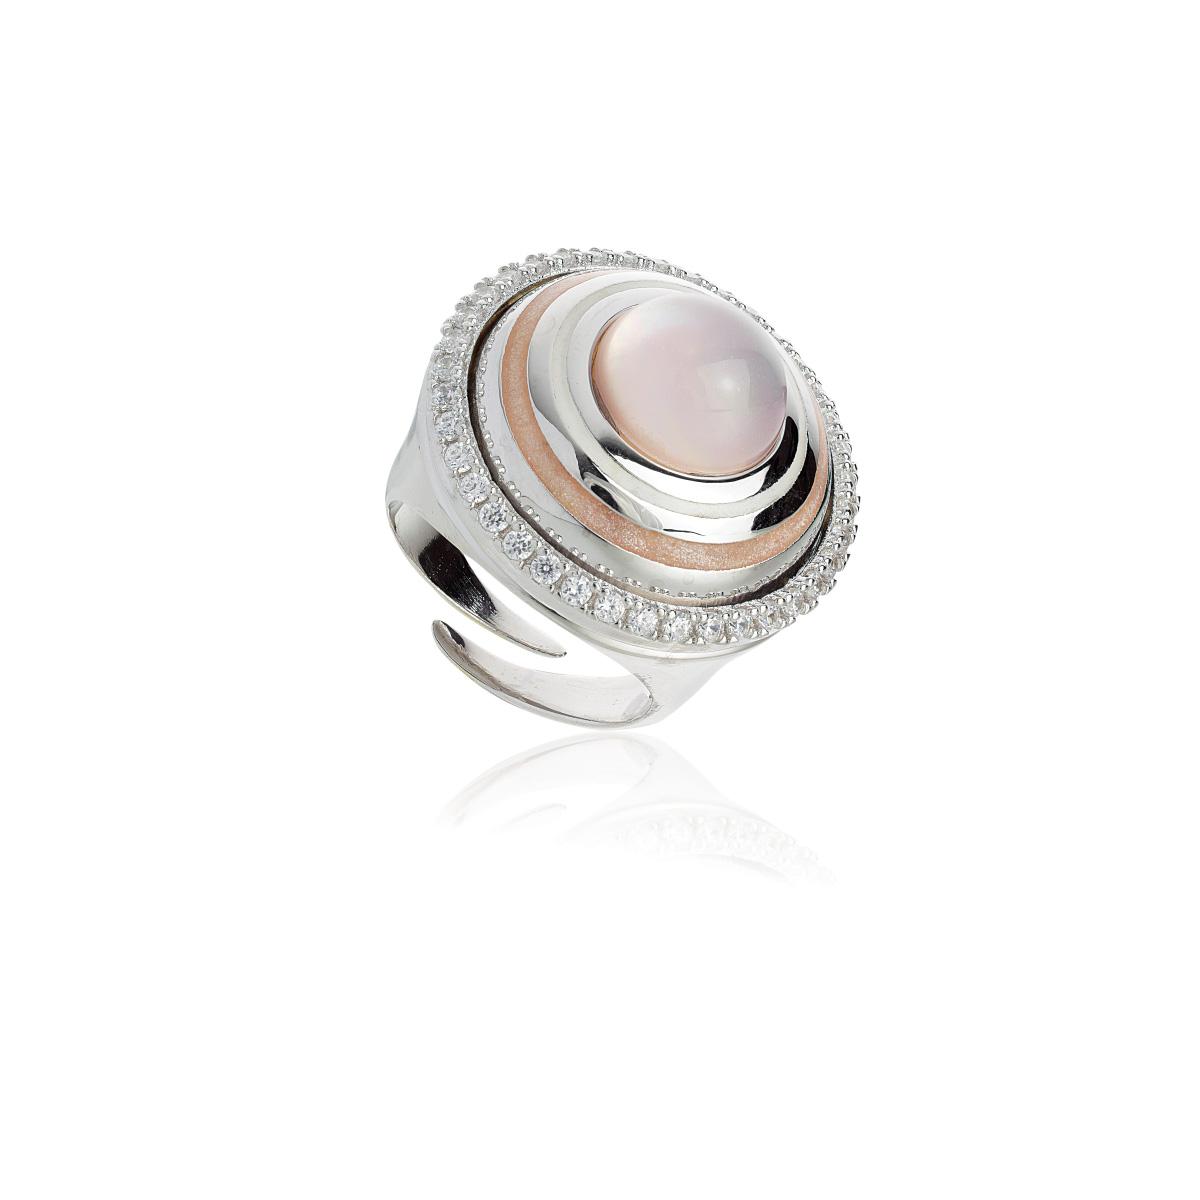 Ring in 925 rhodium-plated silver, handmade enamelling, with natural stone and cubic zirconia